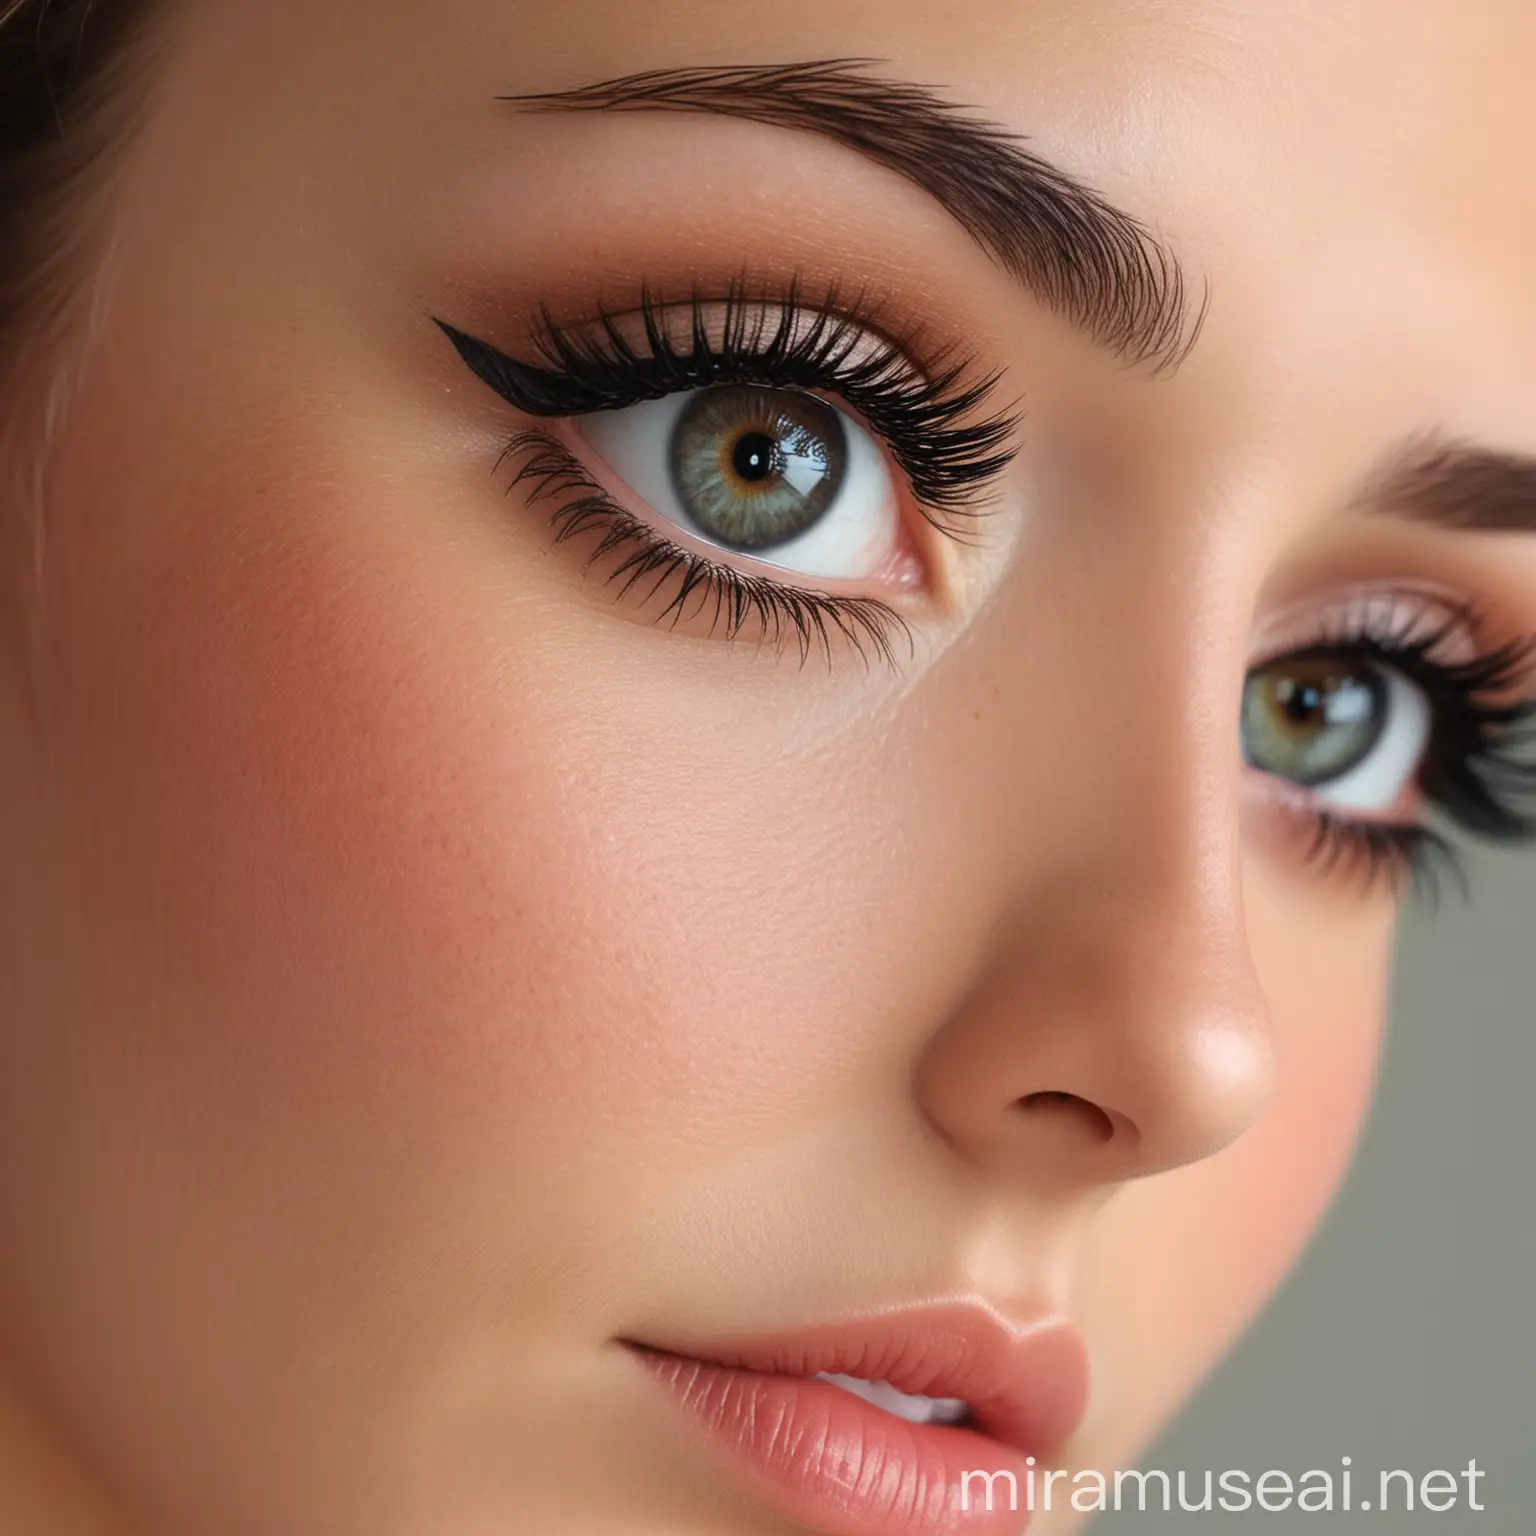 Portrait with Prominent Eyelashes and CharacterInspired Features